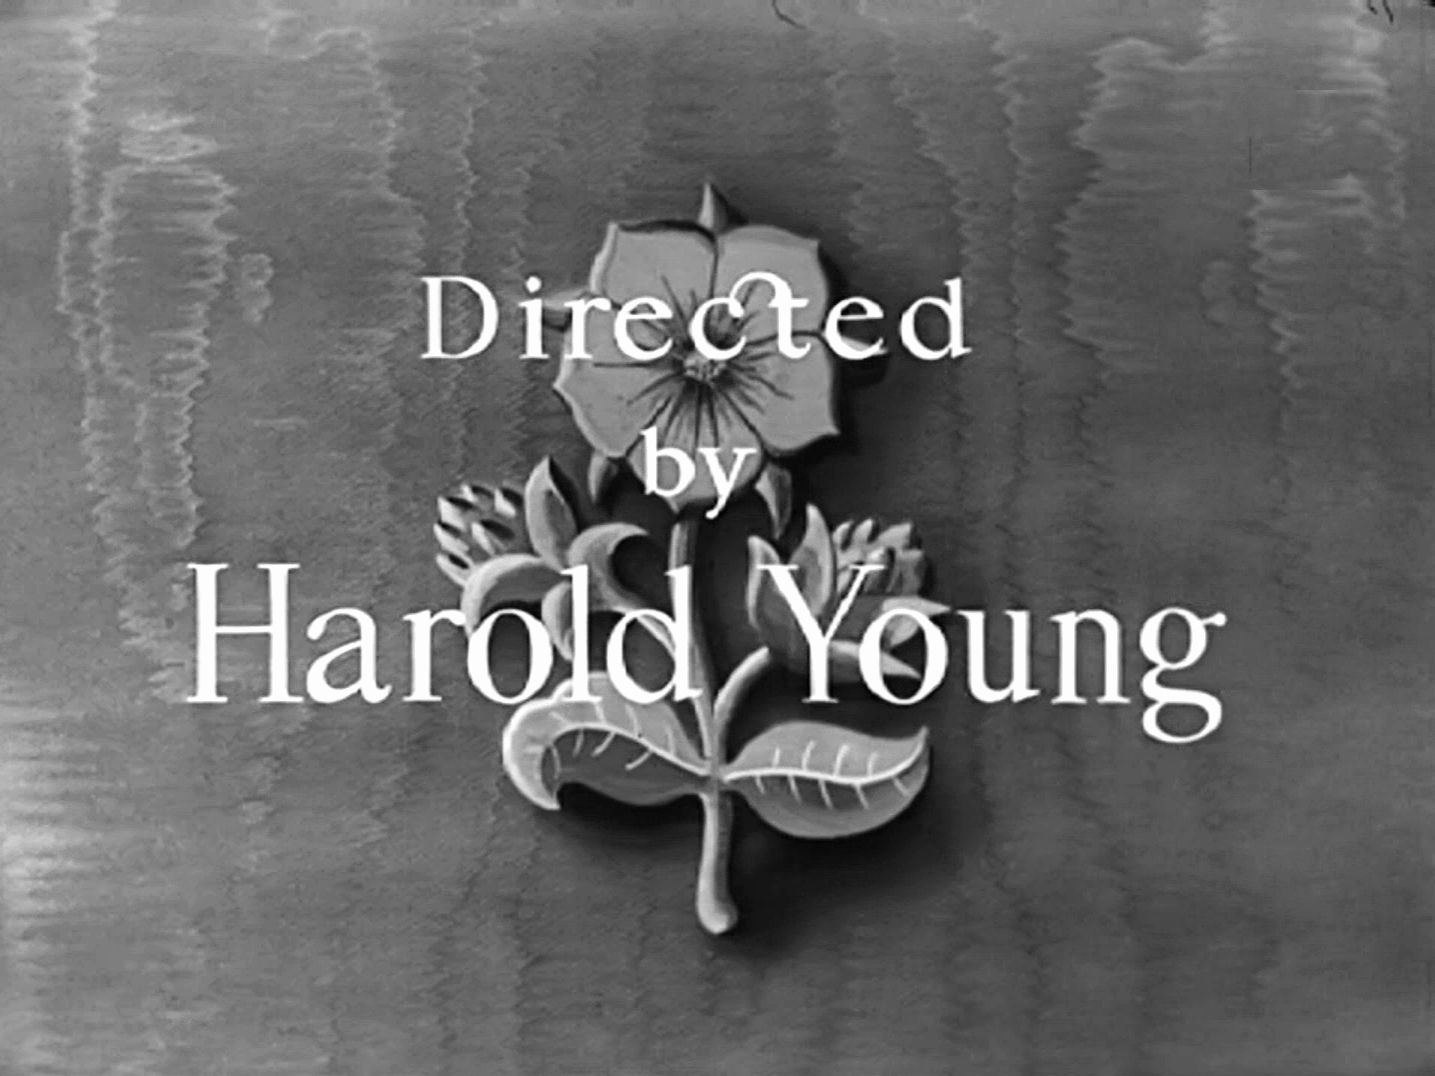 Main title from The Scarlet Pimpernel (1934) (5). Directed by Harold Young